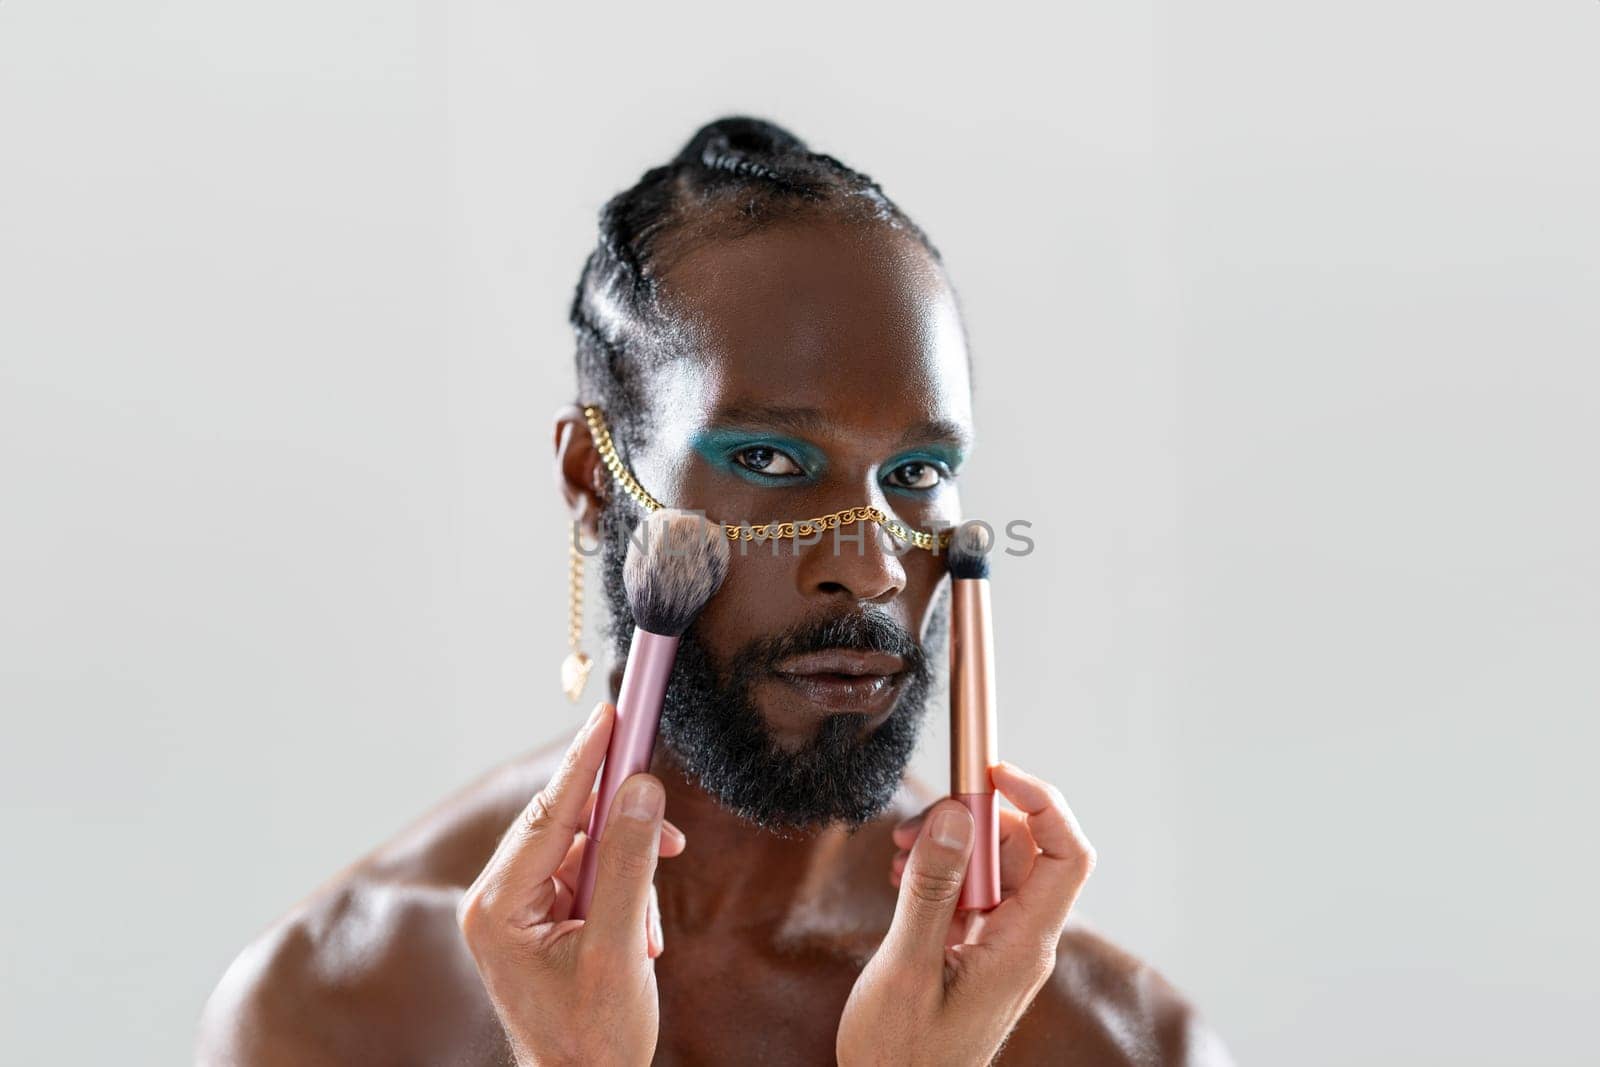 African gay applying make up holding makeup brush in hand. Close up portrait homosexual man looking at camera ready for apply visage on face. Fashion lgbt concept.